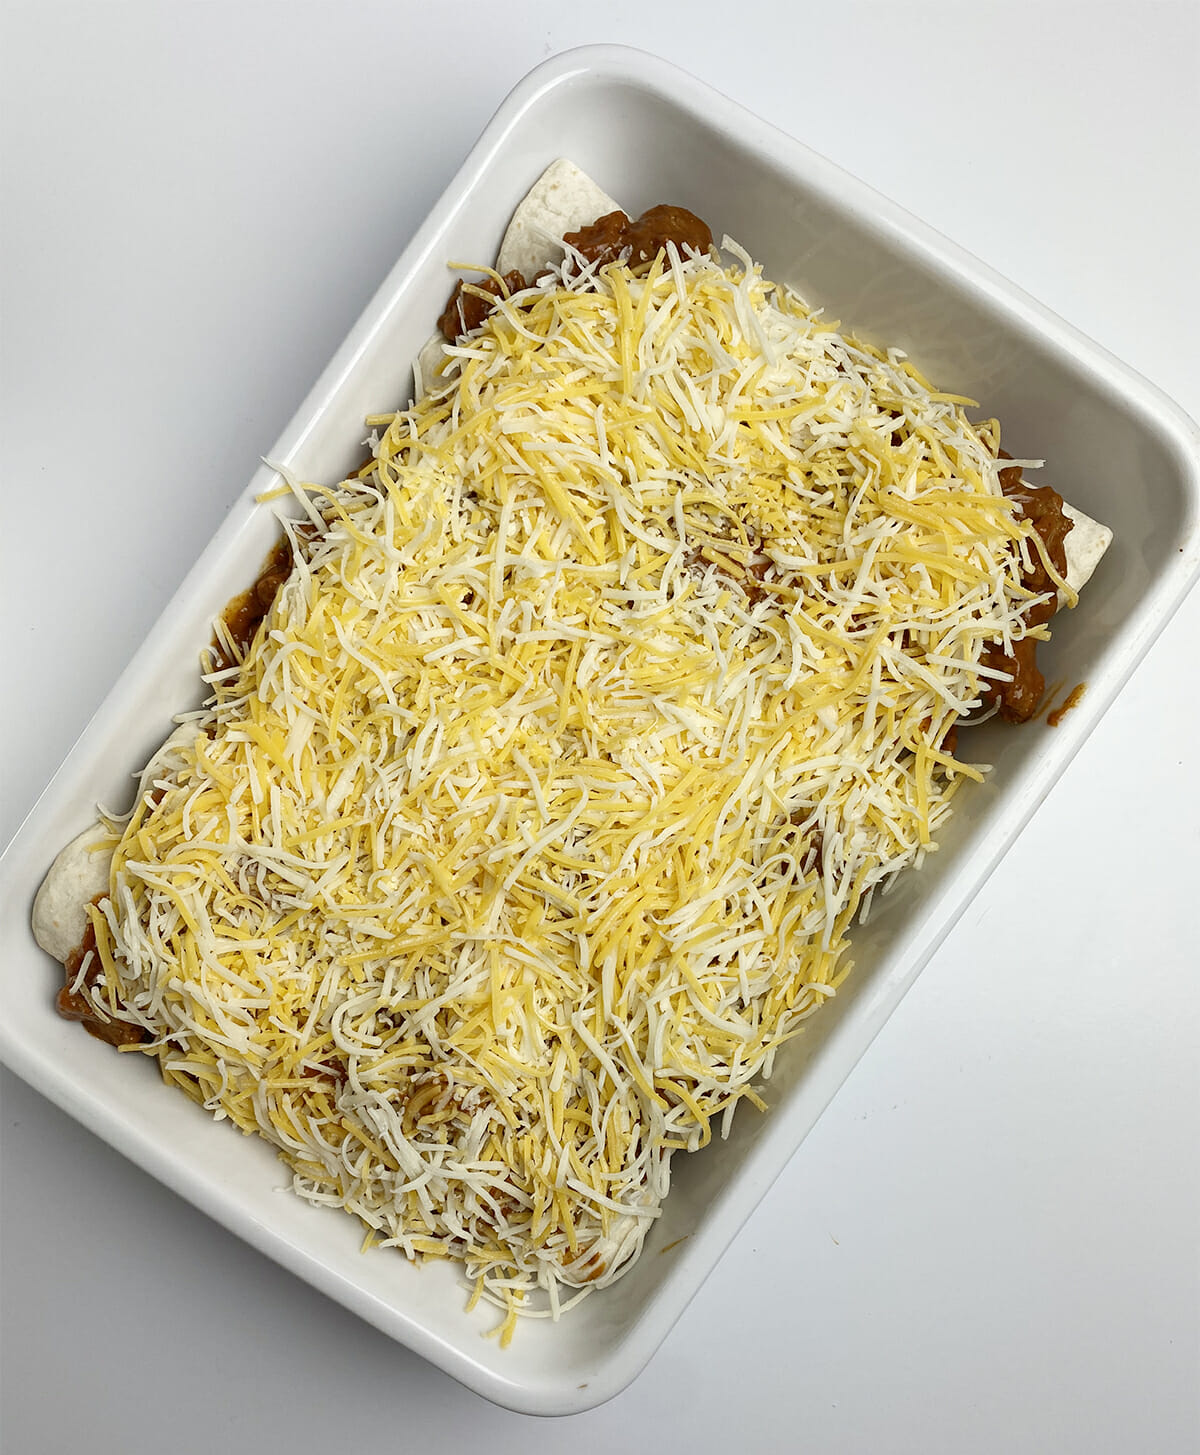 Chili dog casserole with cheese sprinkled on top.